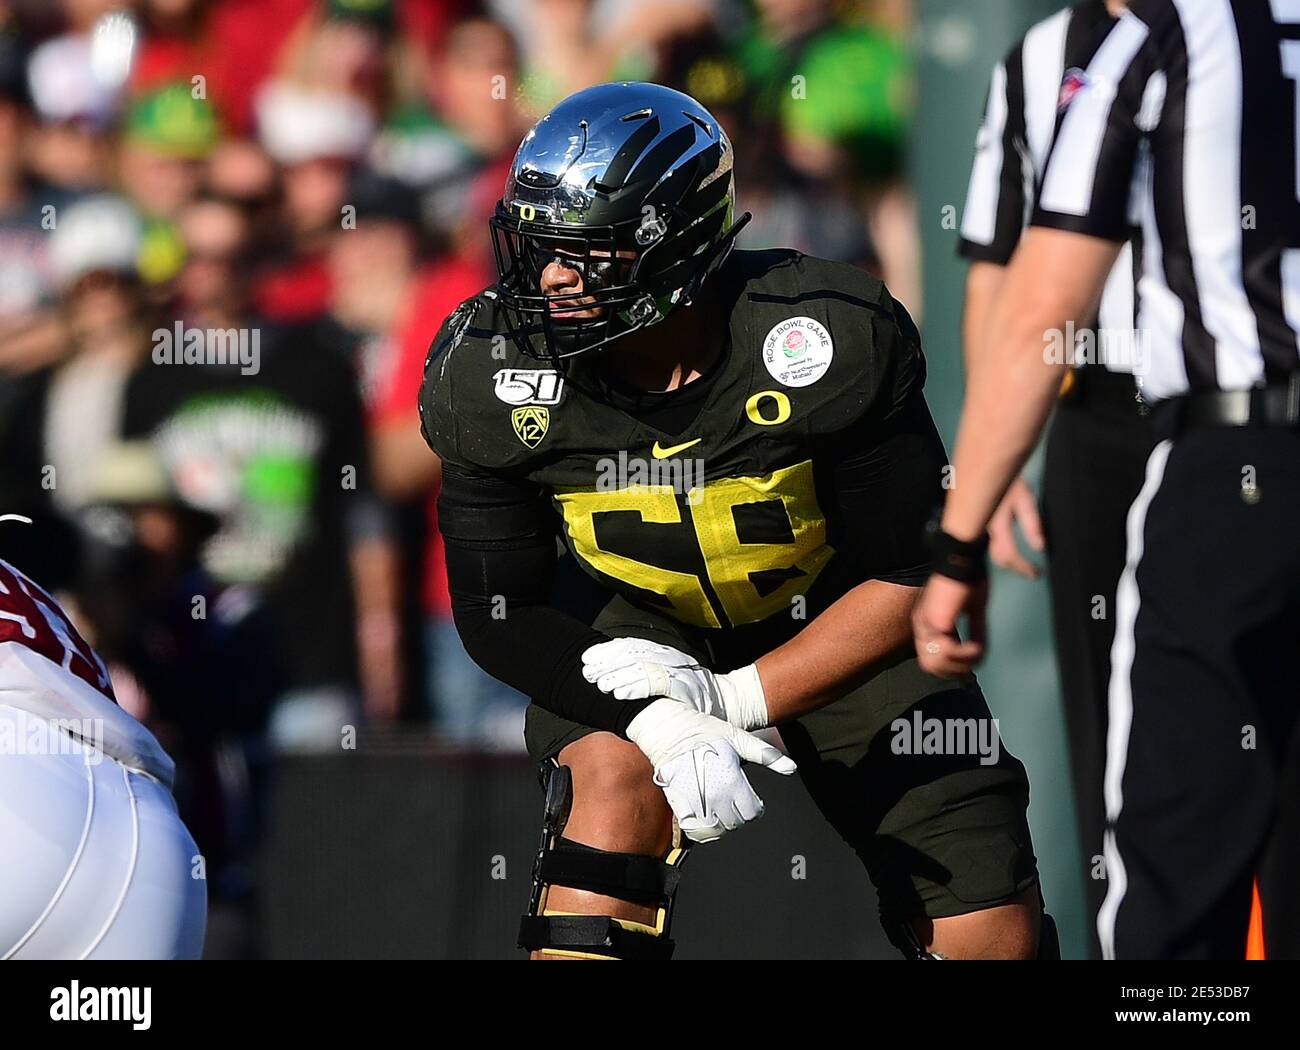 (FILE PHOTOS).former Oregon Ducks offensive tackle (58) Penei Sewell is projected to go in the 1st Round of the NFL Draft, here he is pictured on January 1, 2020, the NFL Draft will be held in Cleveland, Ohio on April 29, 2021.(Mandatory Credit: Jose/MarinMedia.org/Cal Sport Media) (Absolute Complete photographer, and credits required) Stock Photo